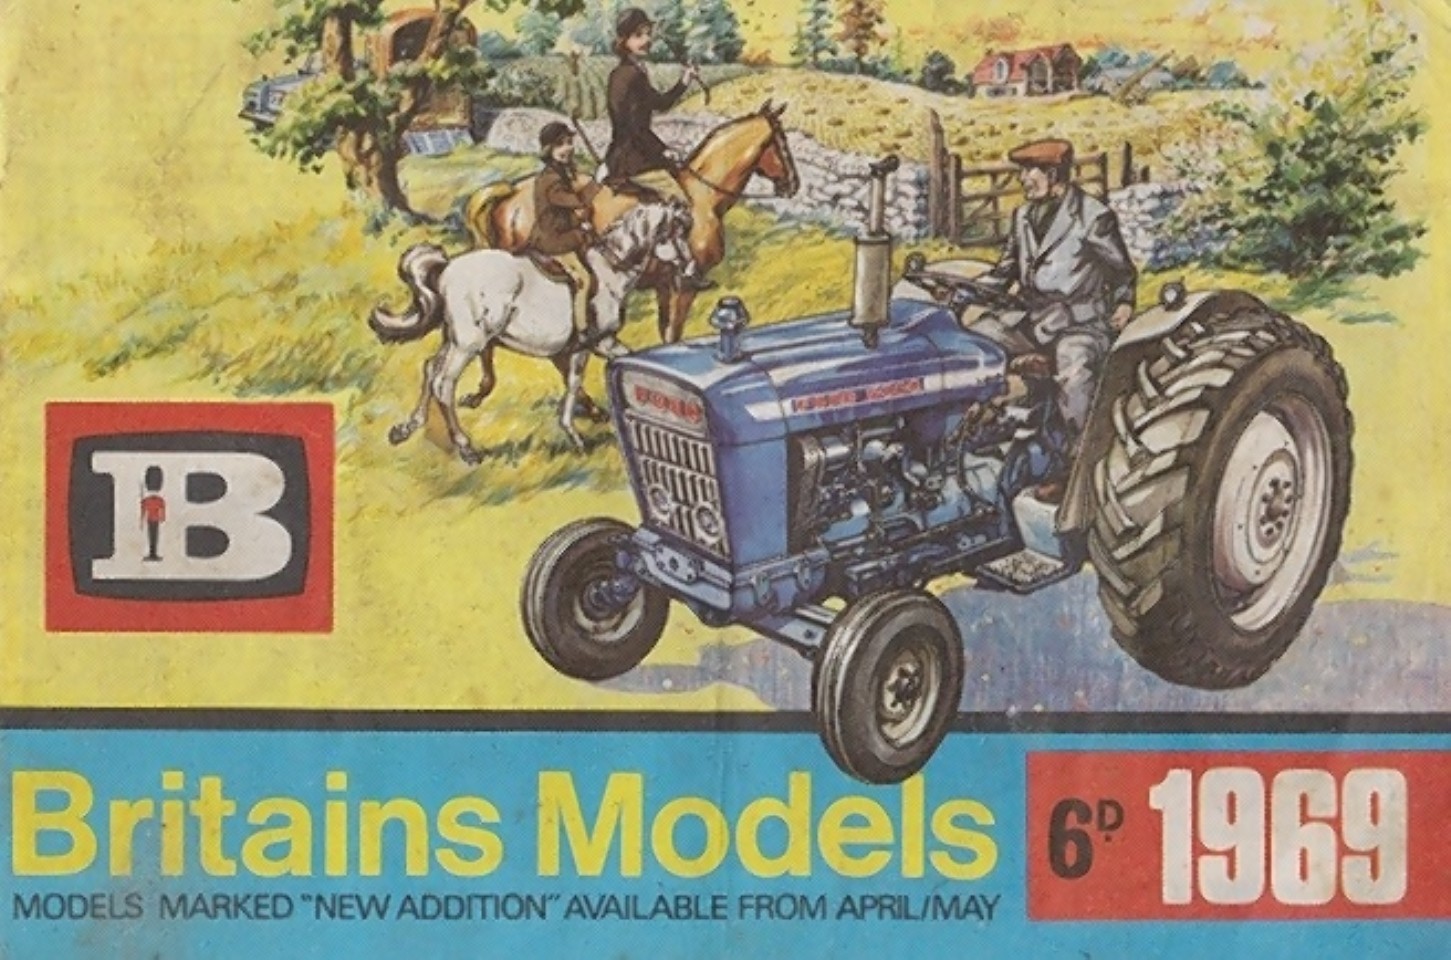 A Britains Models catalogue from 1969